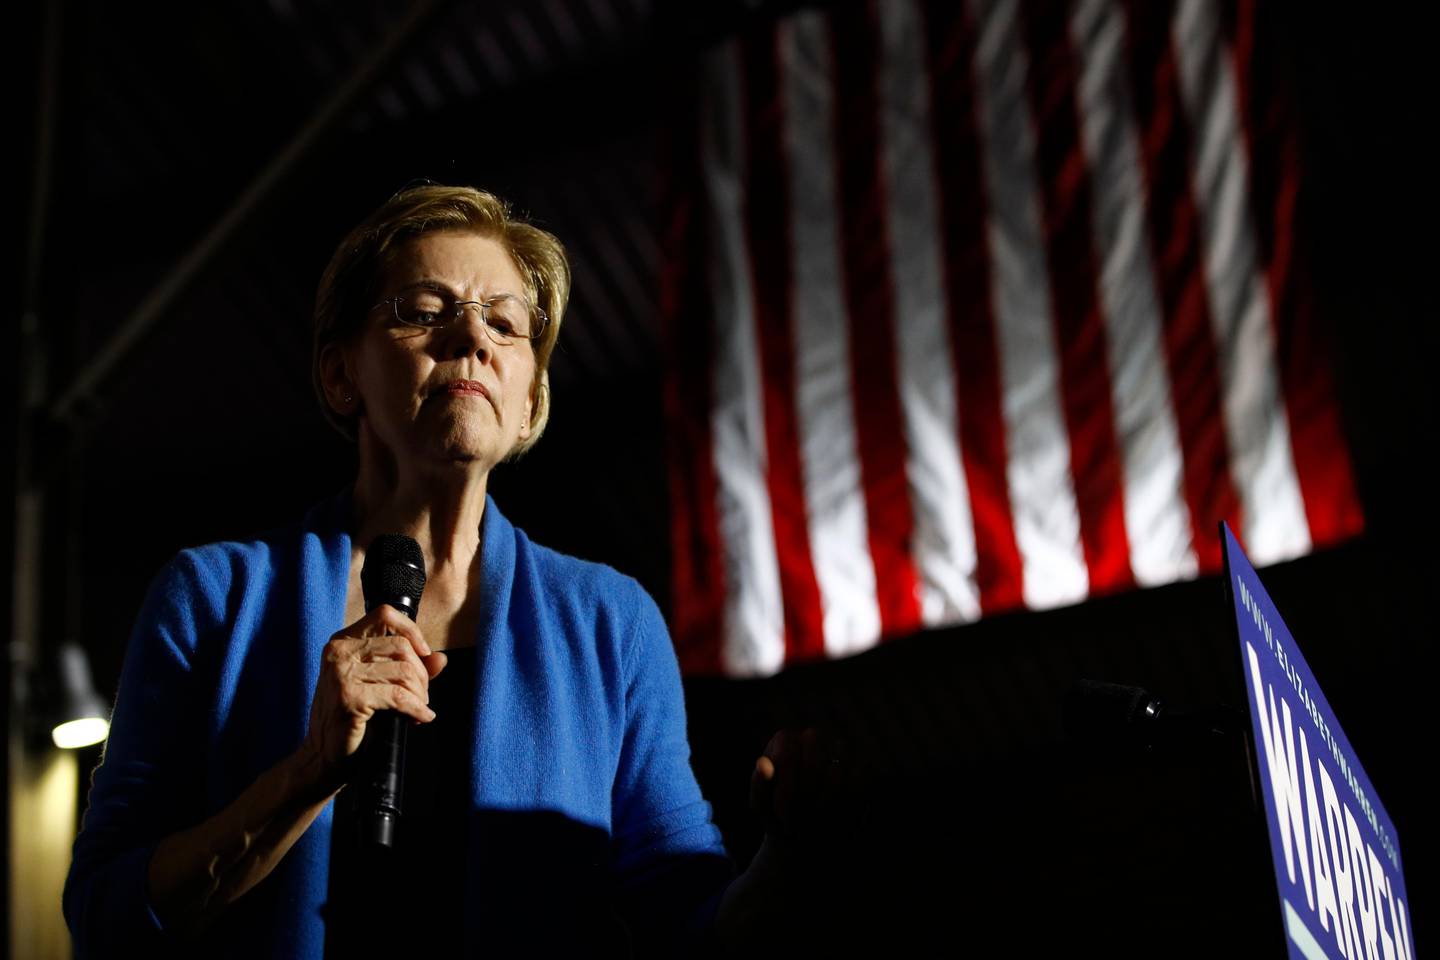 Democratic presidential candidate Sen. Elizabeth Warren, D-Mass., speaks during a primary election night rally, Tuesday, March 3, 2020, at Eastern Market in Detroit. (AP Photo/Patrick Semansky)